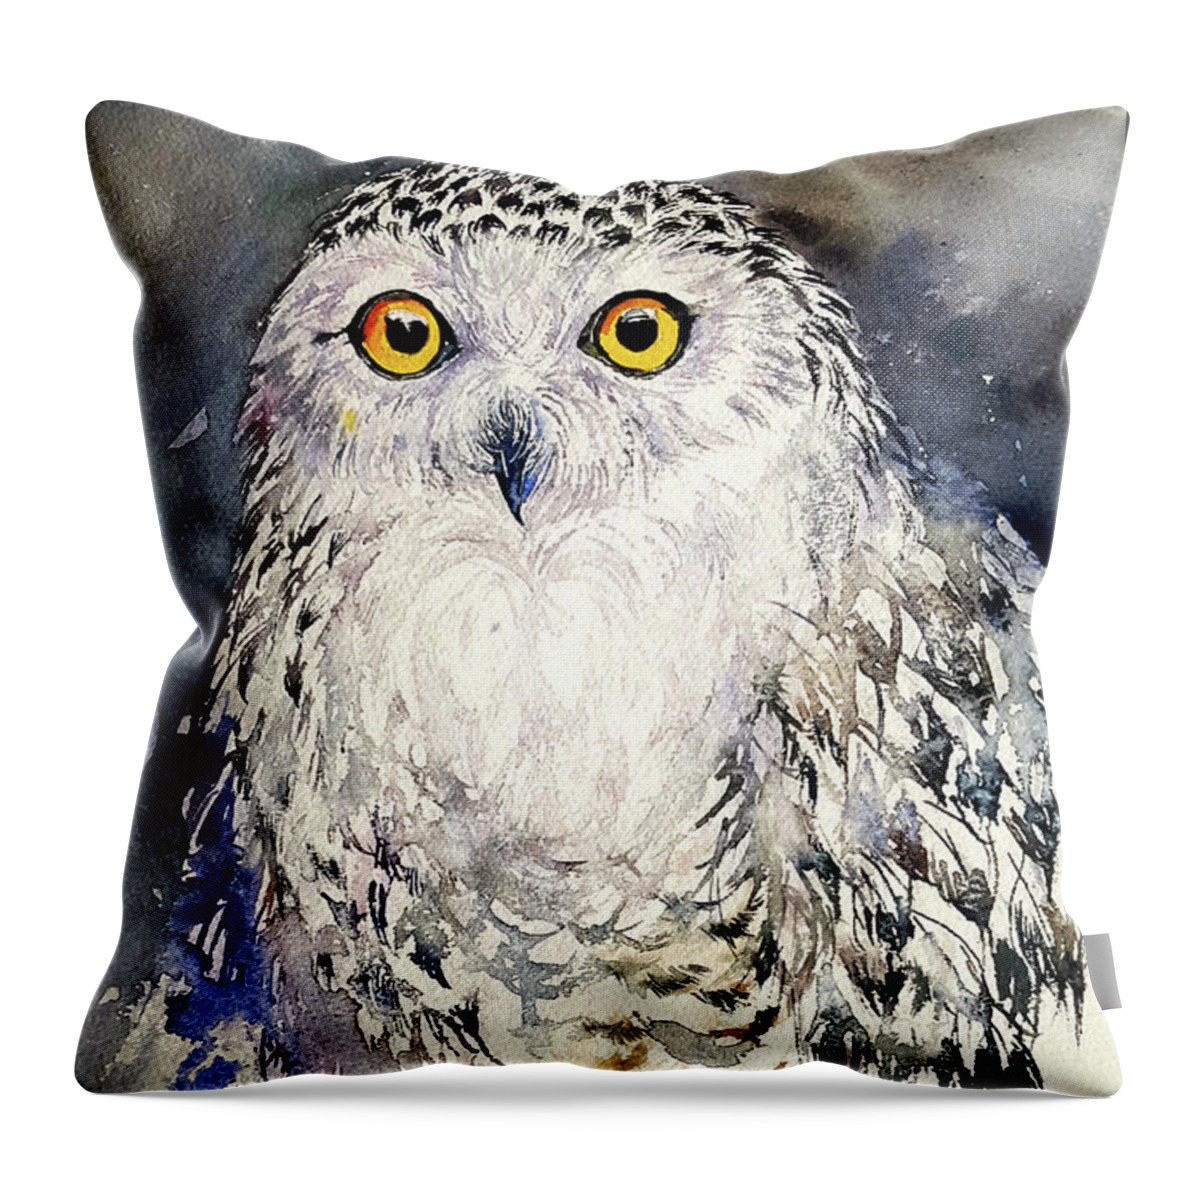 Owl Throw Pillow featuring the painting Snowy Owl by Arti Chauhan